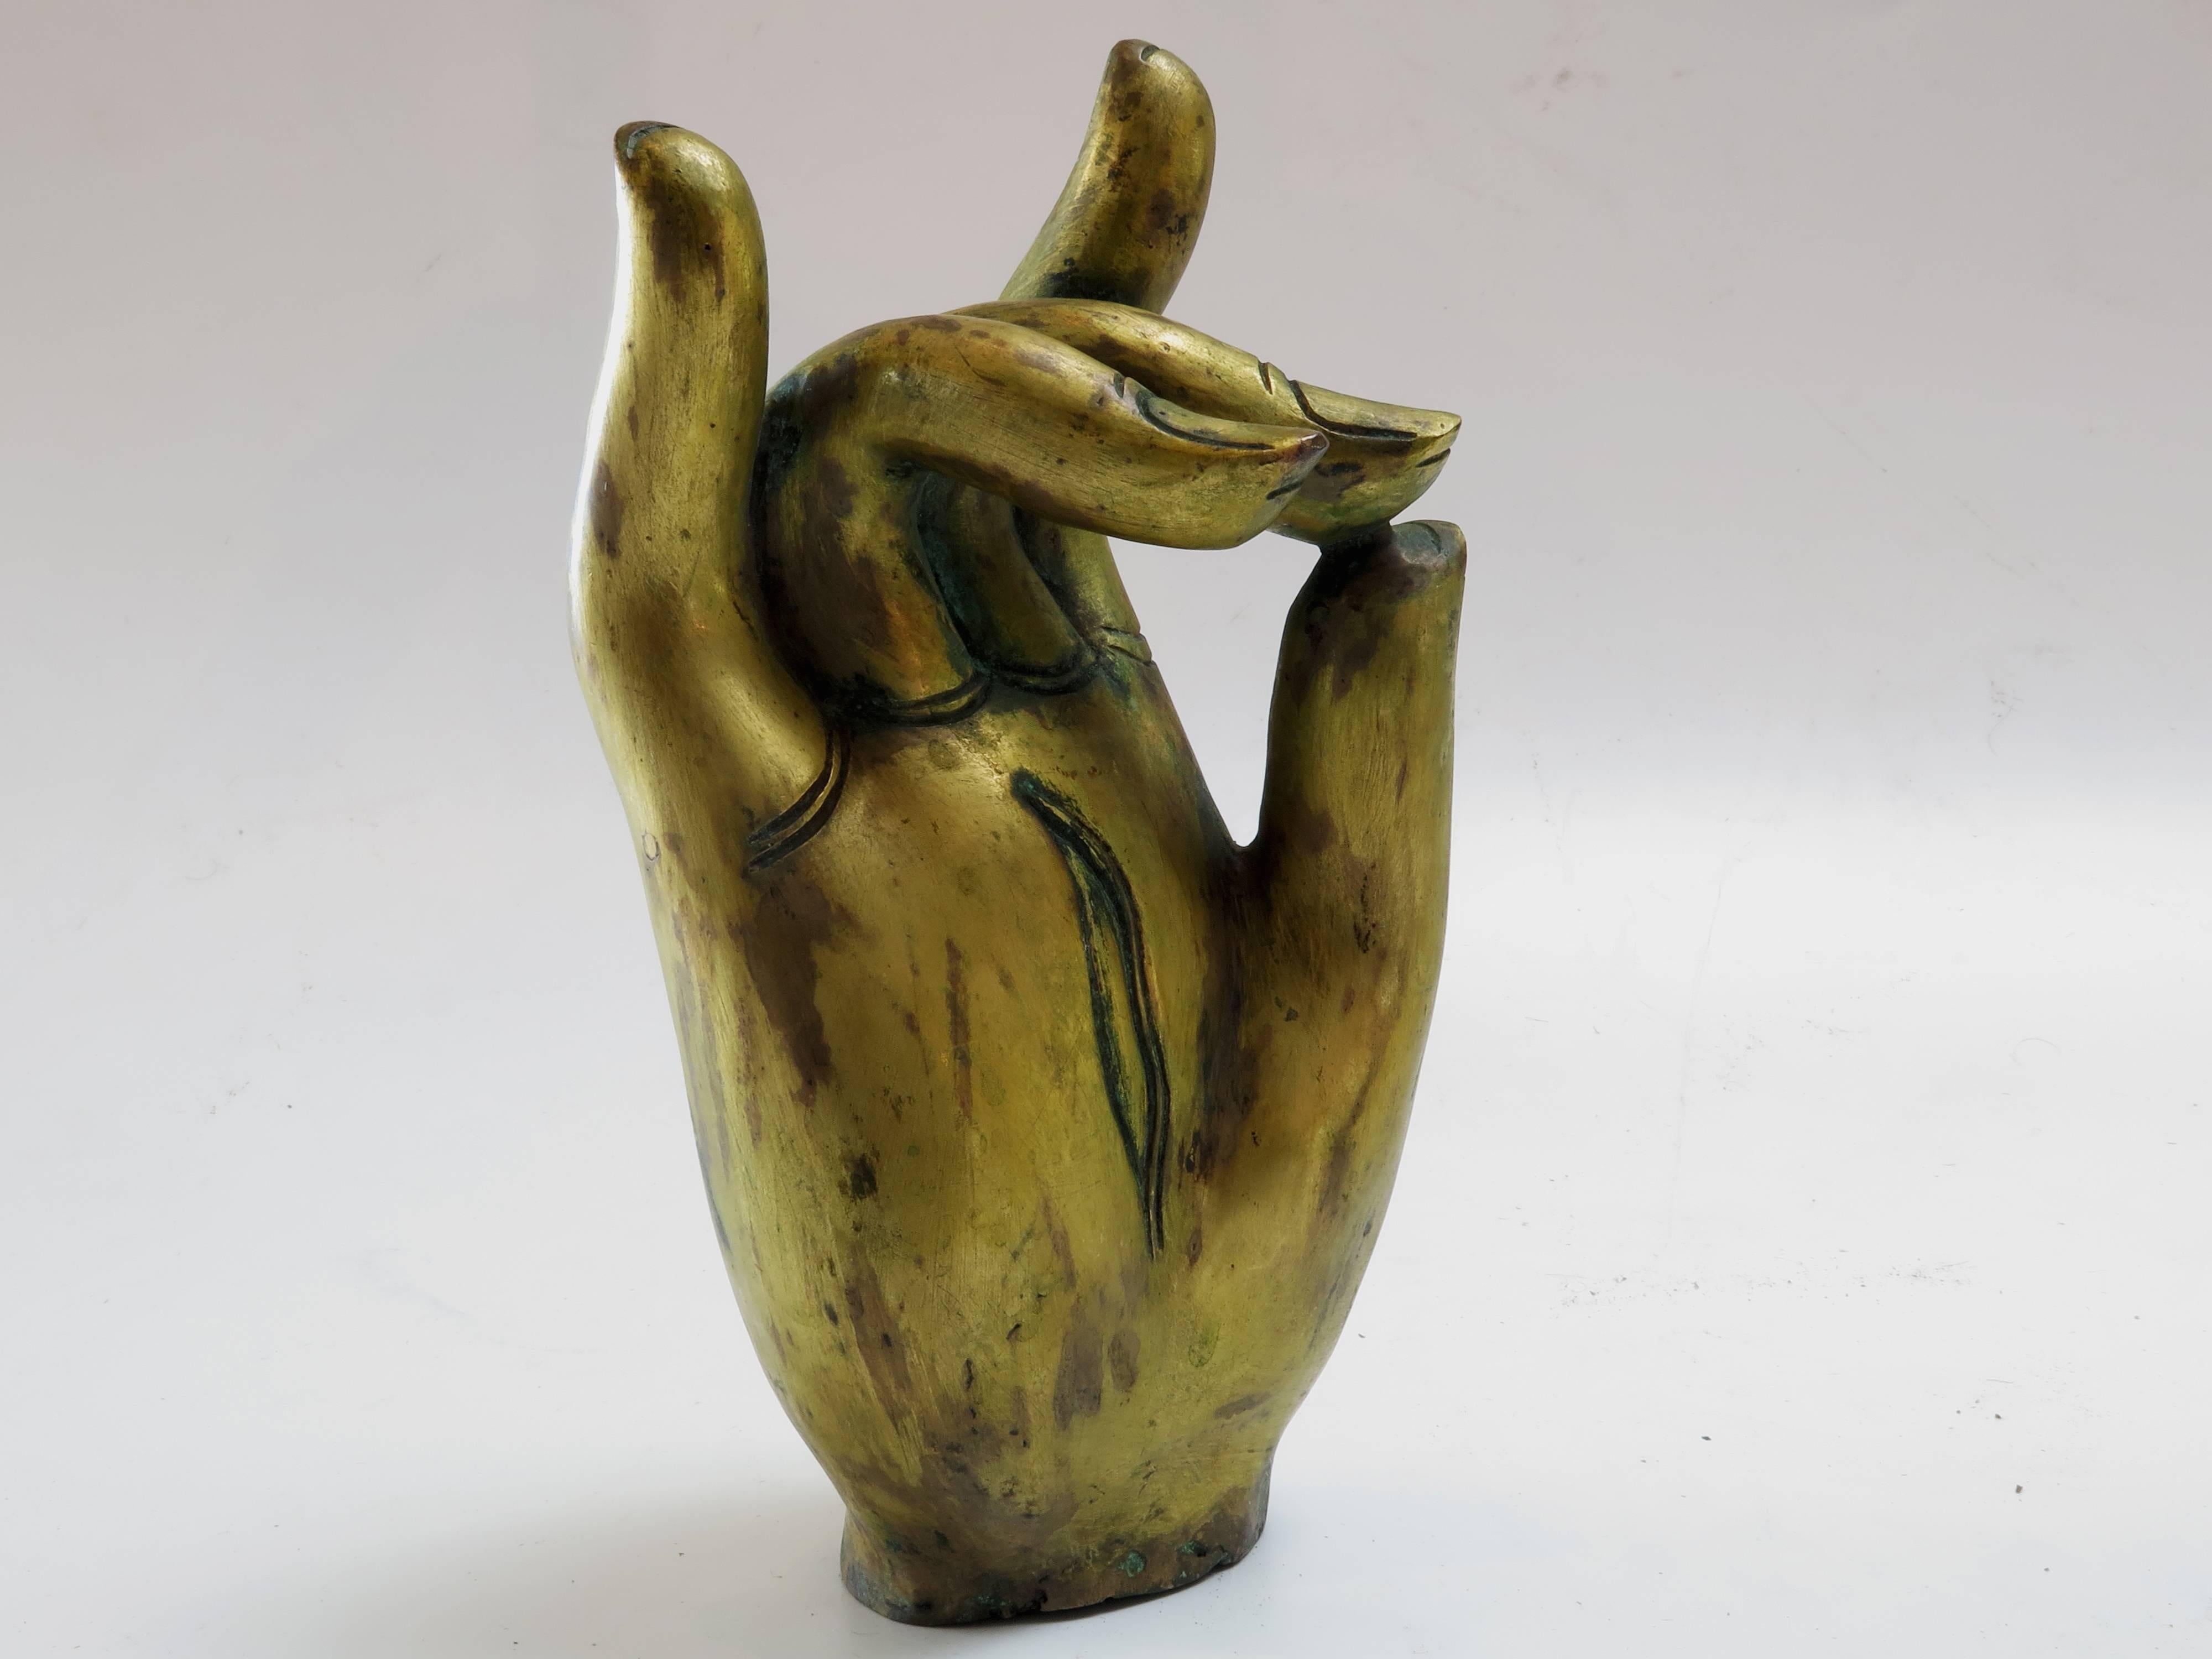 A large and well-cast, gilt right hand of a Bodhisattva. A fragment from what would have been a larger than life statue, this gracious and elegant hand has wonderful detail paid to the fingernails.
This particular hand displays the Karana mudra,